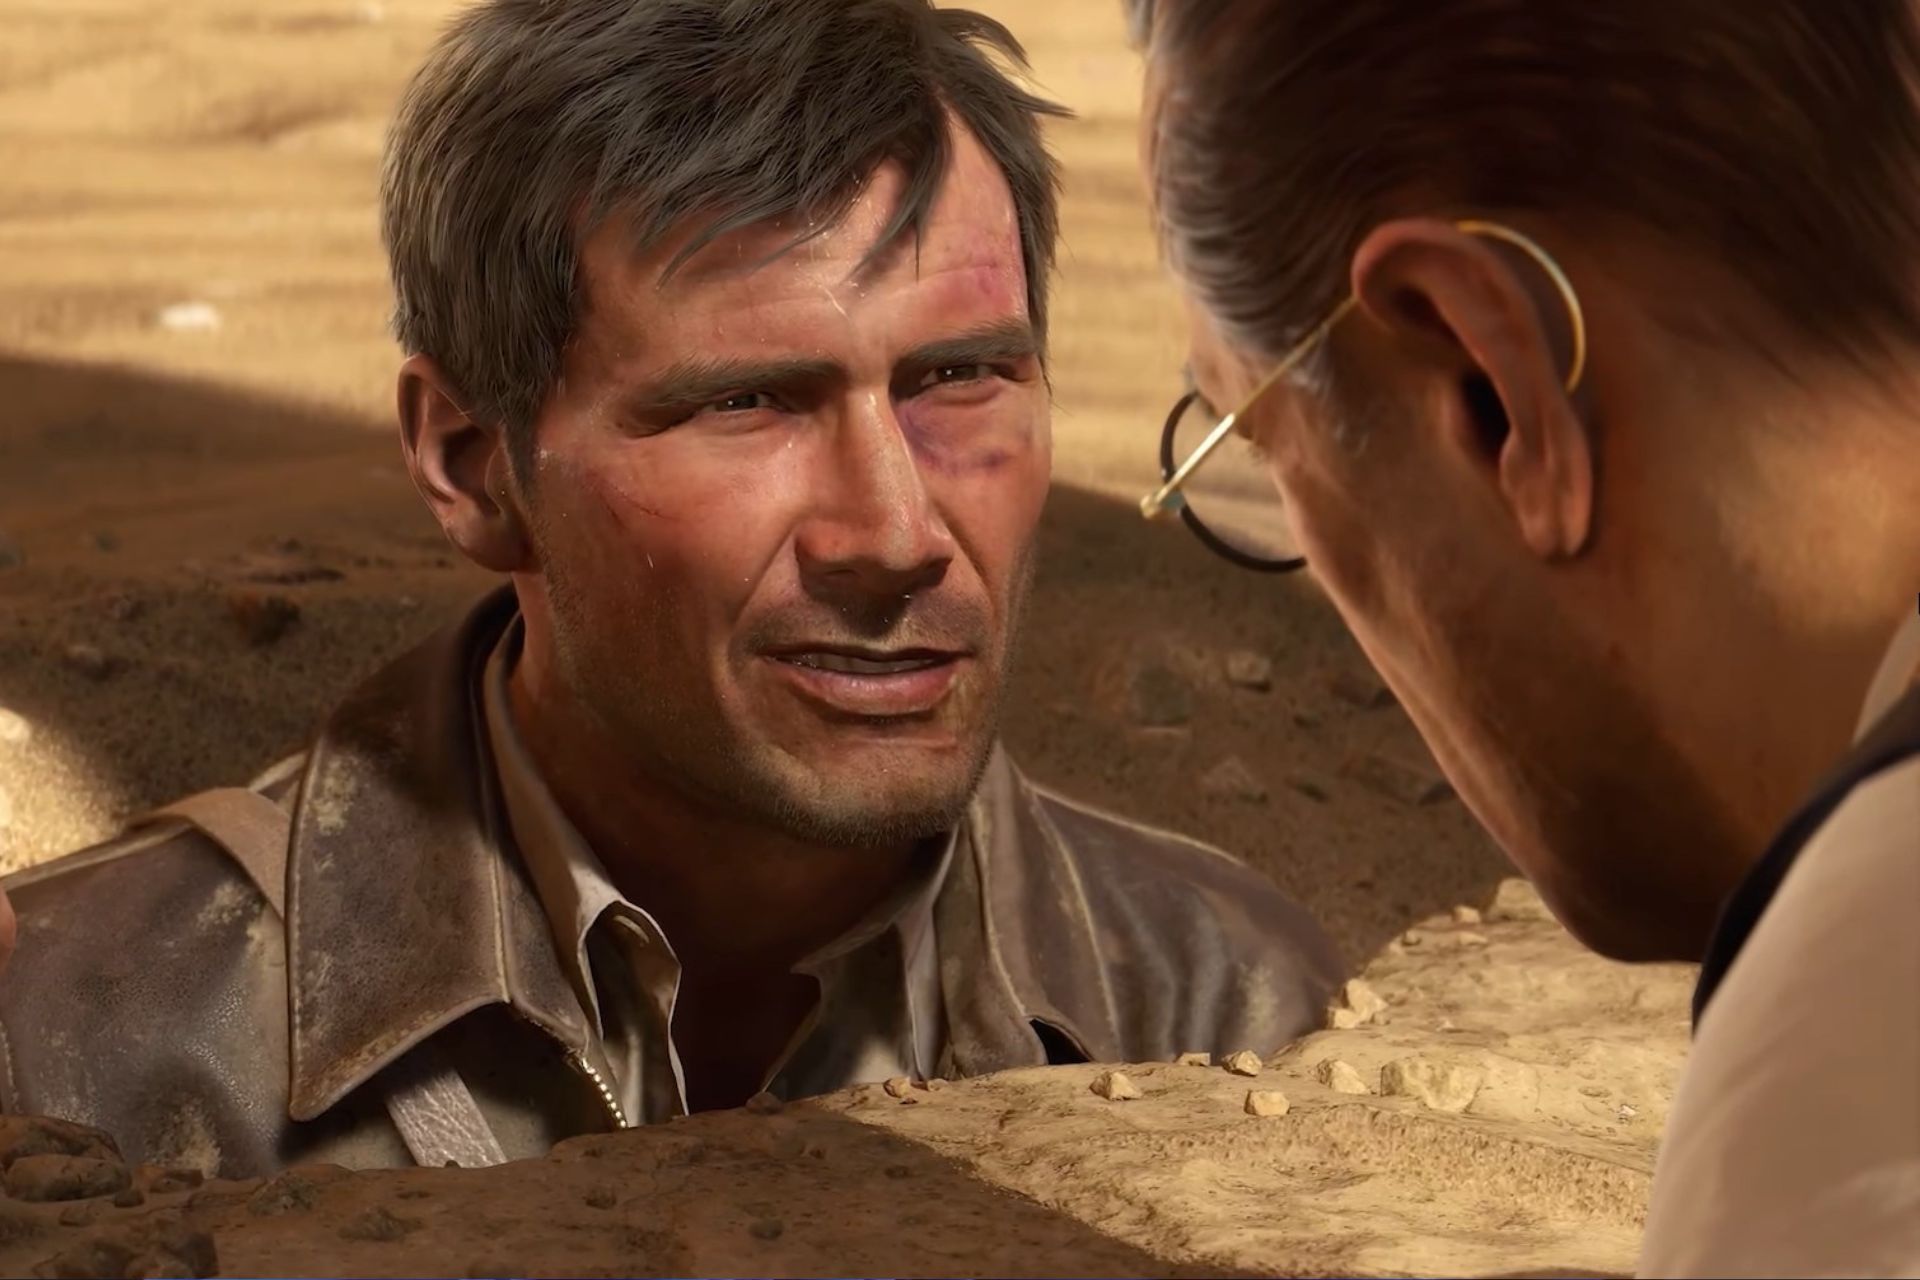 After Starfield, Indiana Jones and the Great Circle could be coming to PlayStation